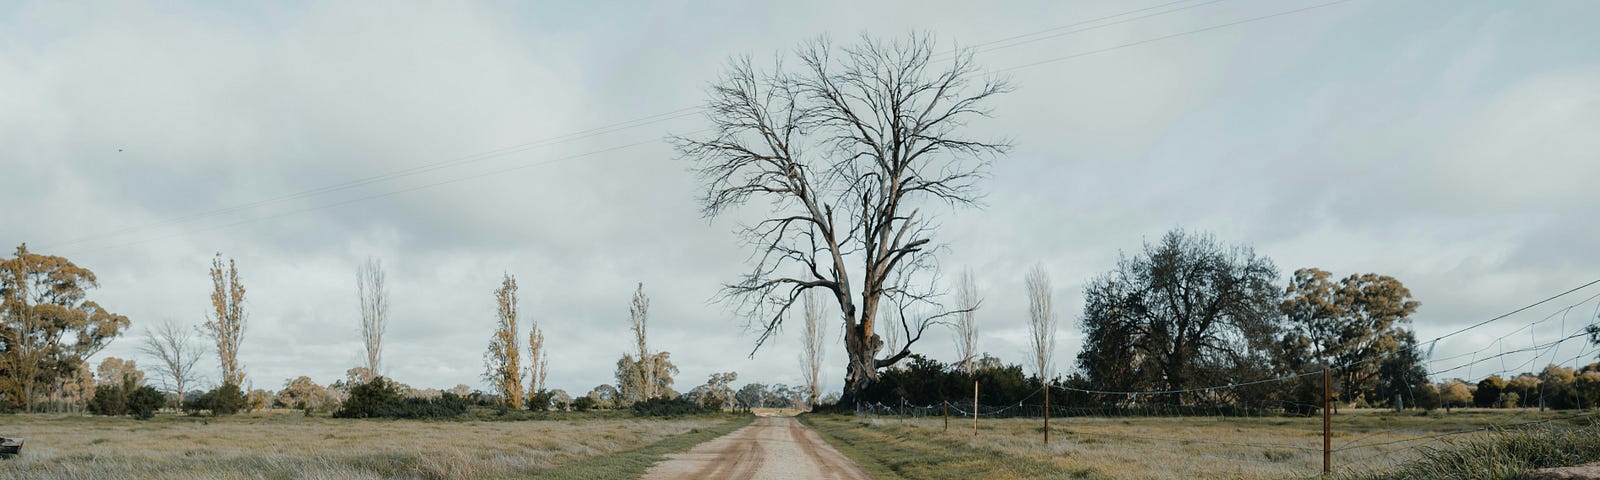 A dirt road disappears into the cloudy horizon with a stark, leafless tree in the distance.